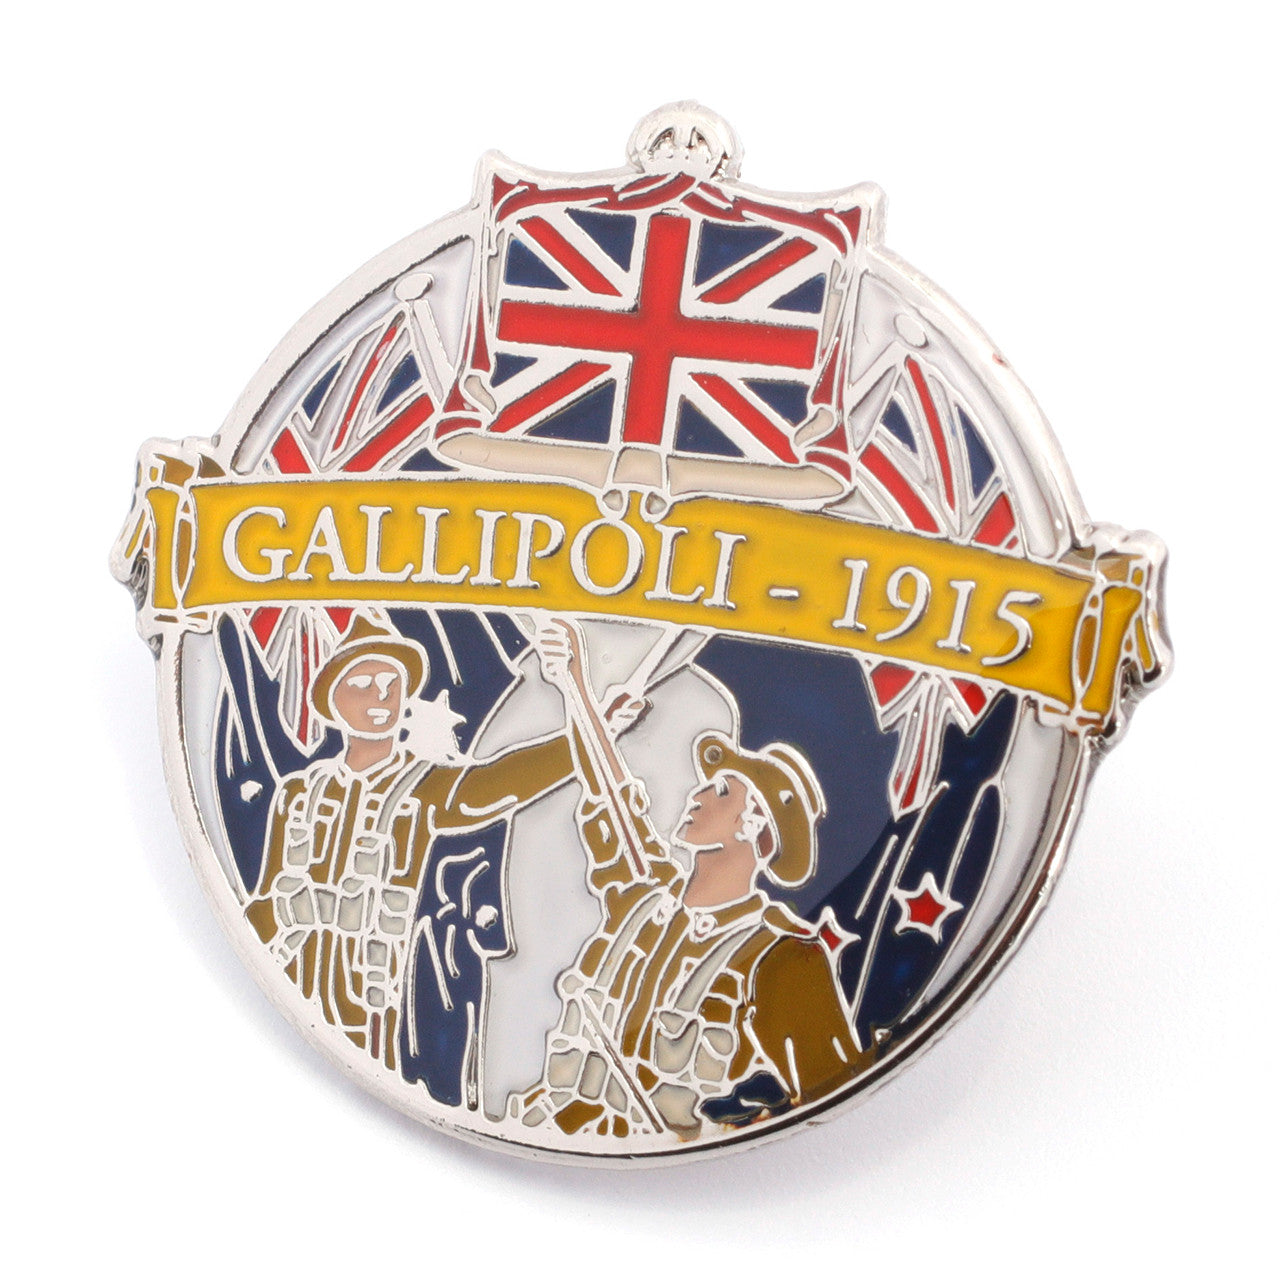 A unique addition to any lapel or coat, this striking Australian &amp; New Zealand Gallipoli Lapel Pin is a fantastic commemorative piece with unique artwork. Inspired by the WWI illustration 'A.N.Z.A.C' by artist and illustrator W. Otho Hewett, www.defenceqstore.com.au